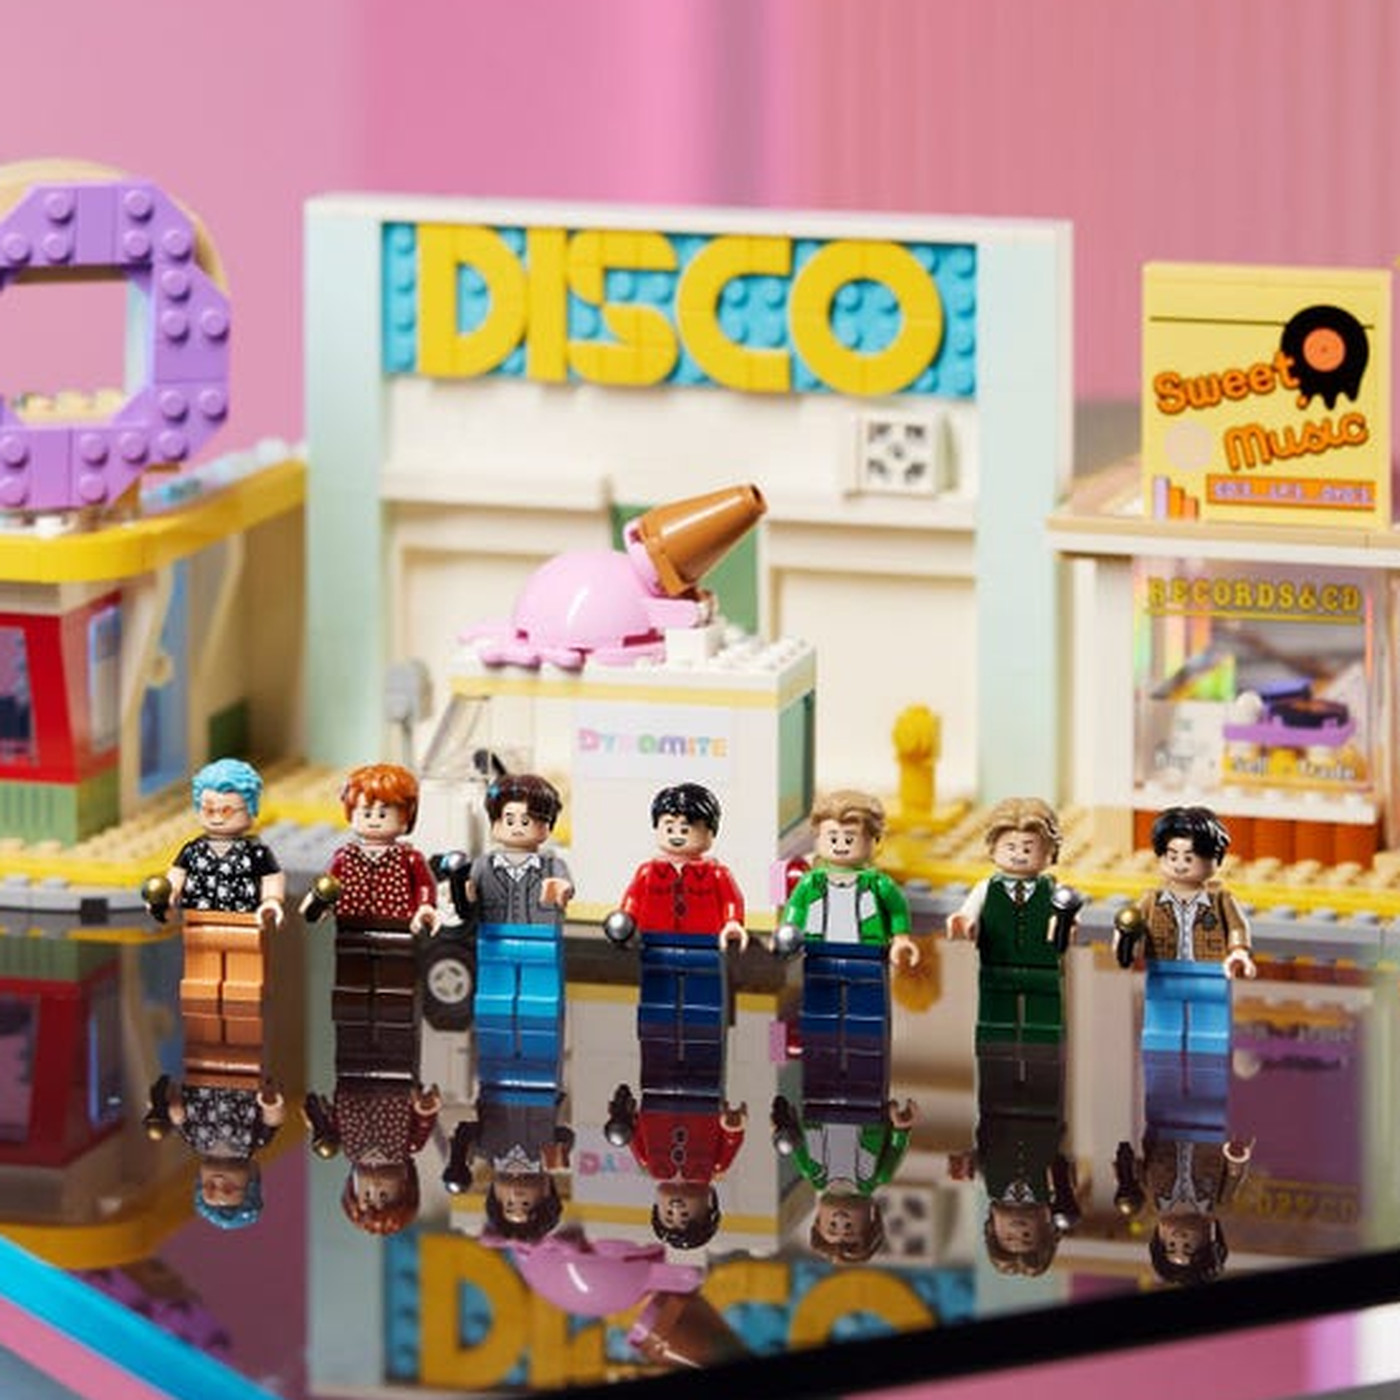 The official BTS Lego set is now available - Polygon